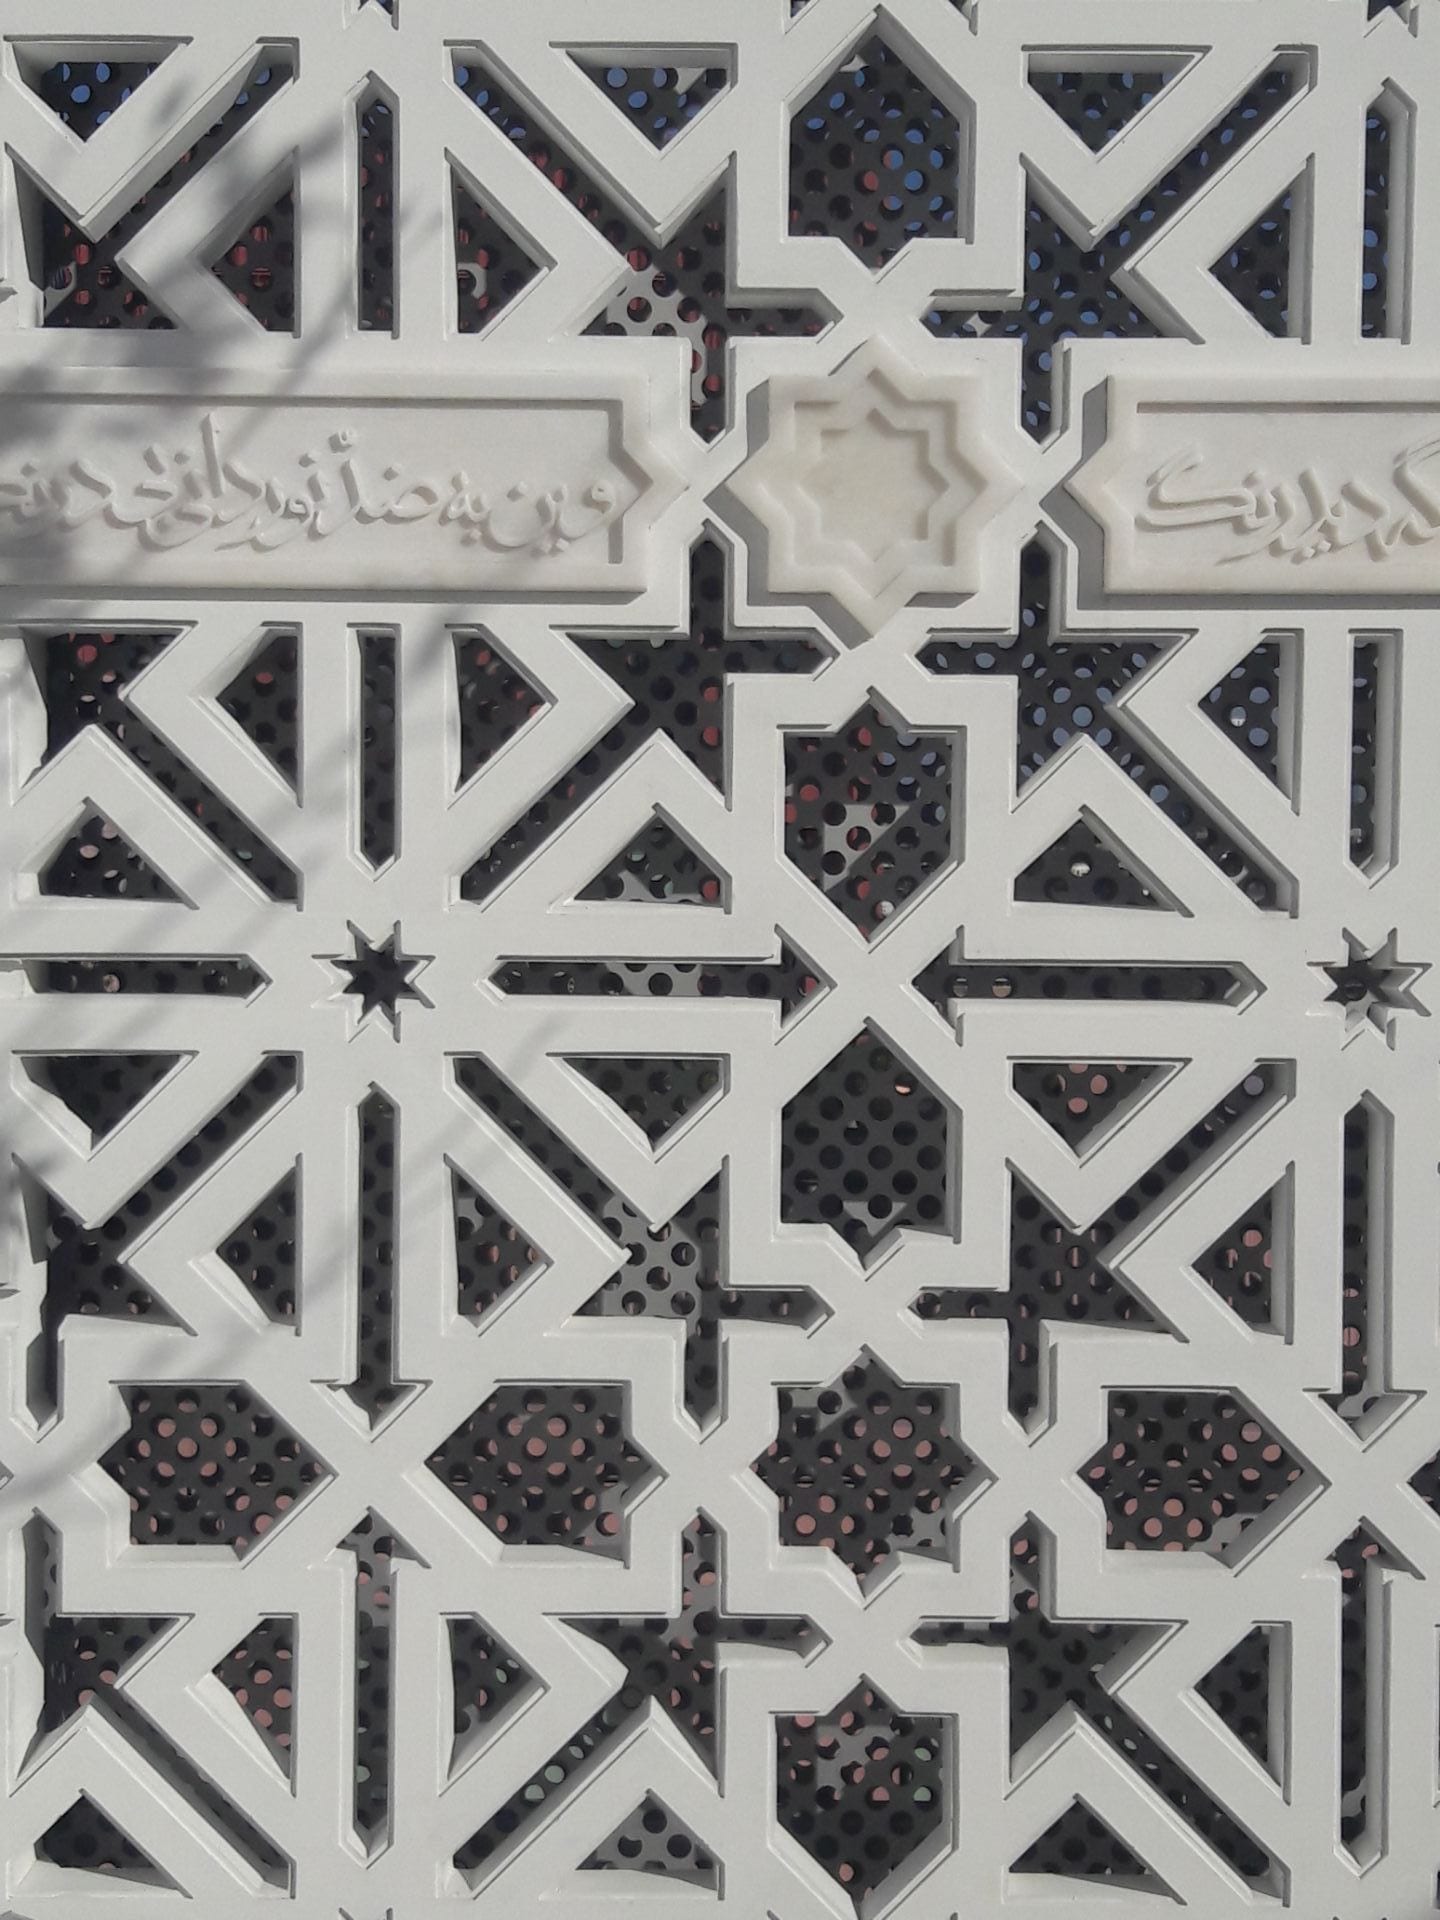 Detail from the white trellis in the Garden of Light with 8 pointed star design and extract from the Qu'ran.